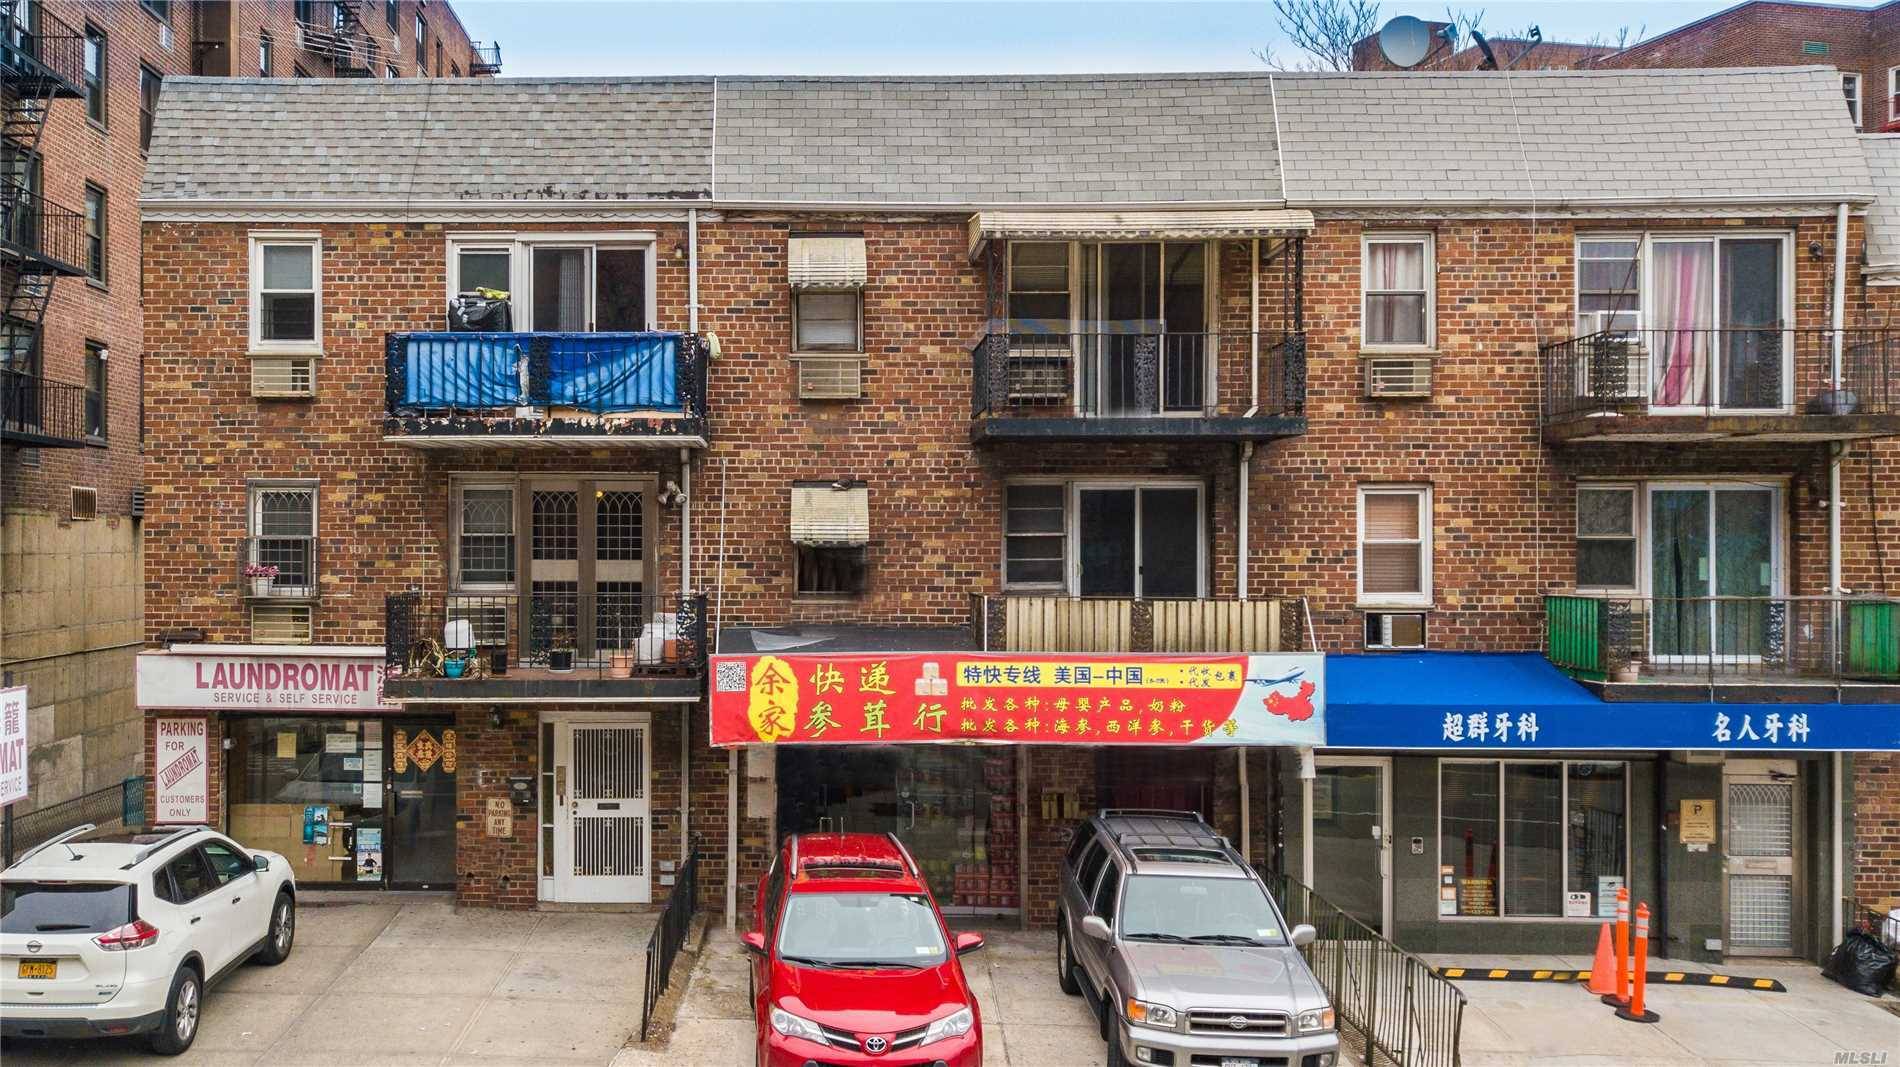 Rare mixed use investment opportunity located along Main Street in active downtown Flushing.